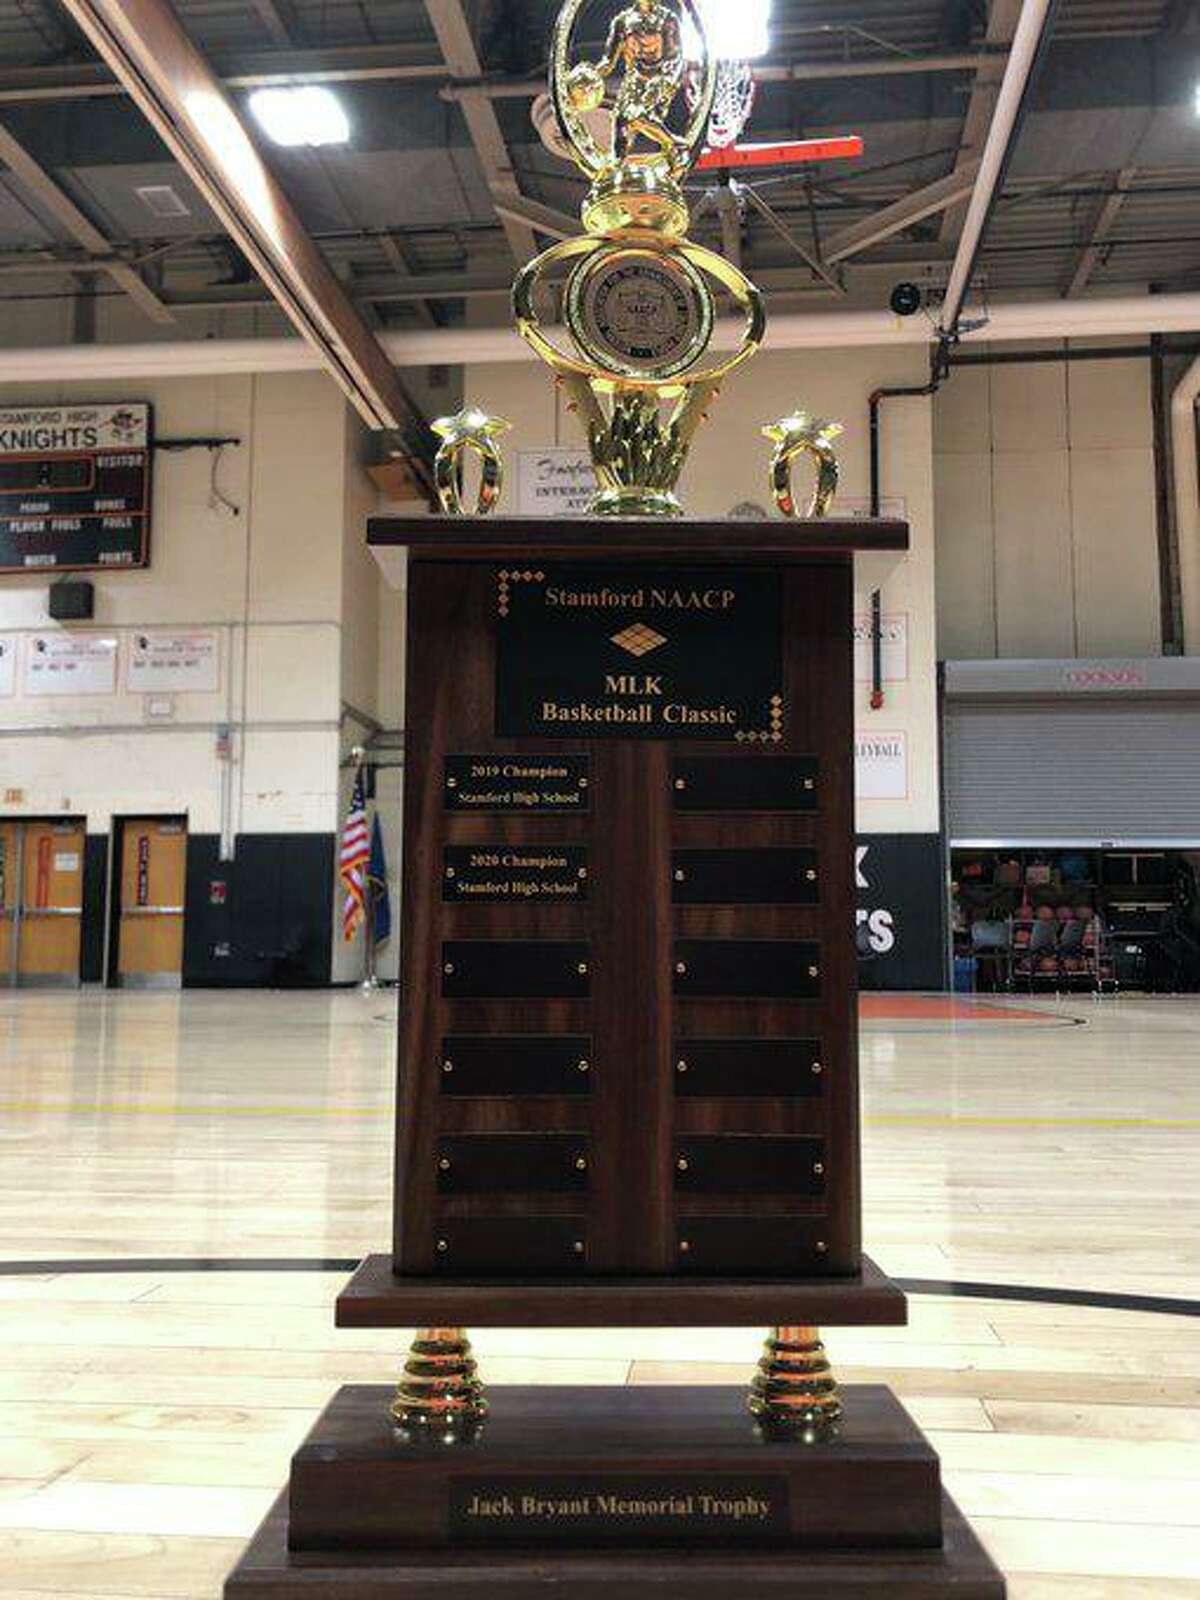 The trophies for the Stamford NAACP/MLK Basketball Classic played between Westhill and Stamford boys and girls basketball every season. The trophy has been named the Jack Bryant Memorial Trophy after the late Stamford NAACP President and city Board of Education member.